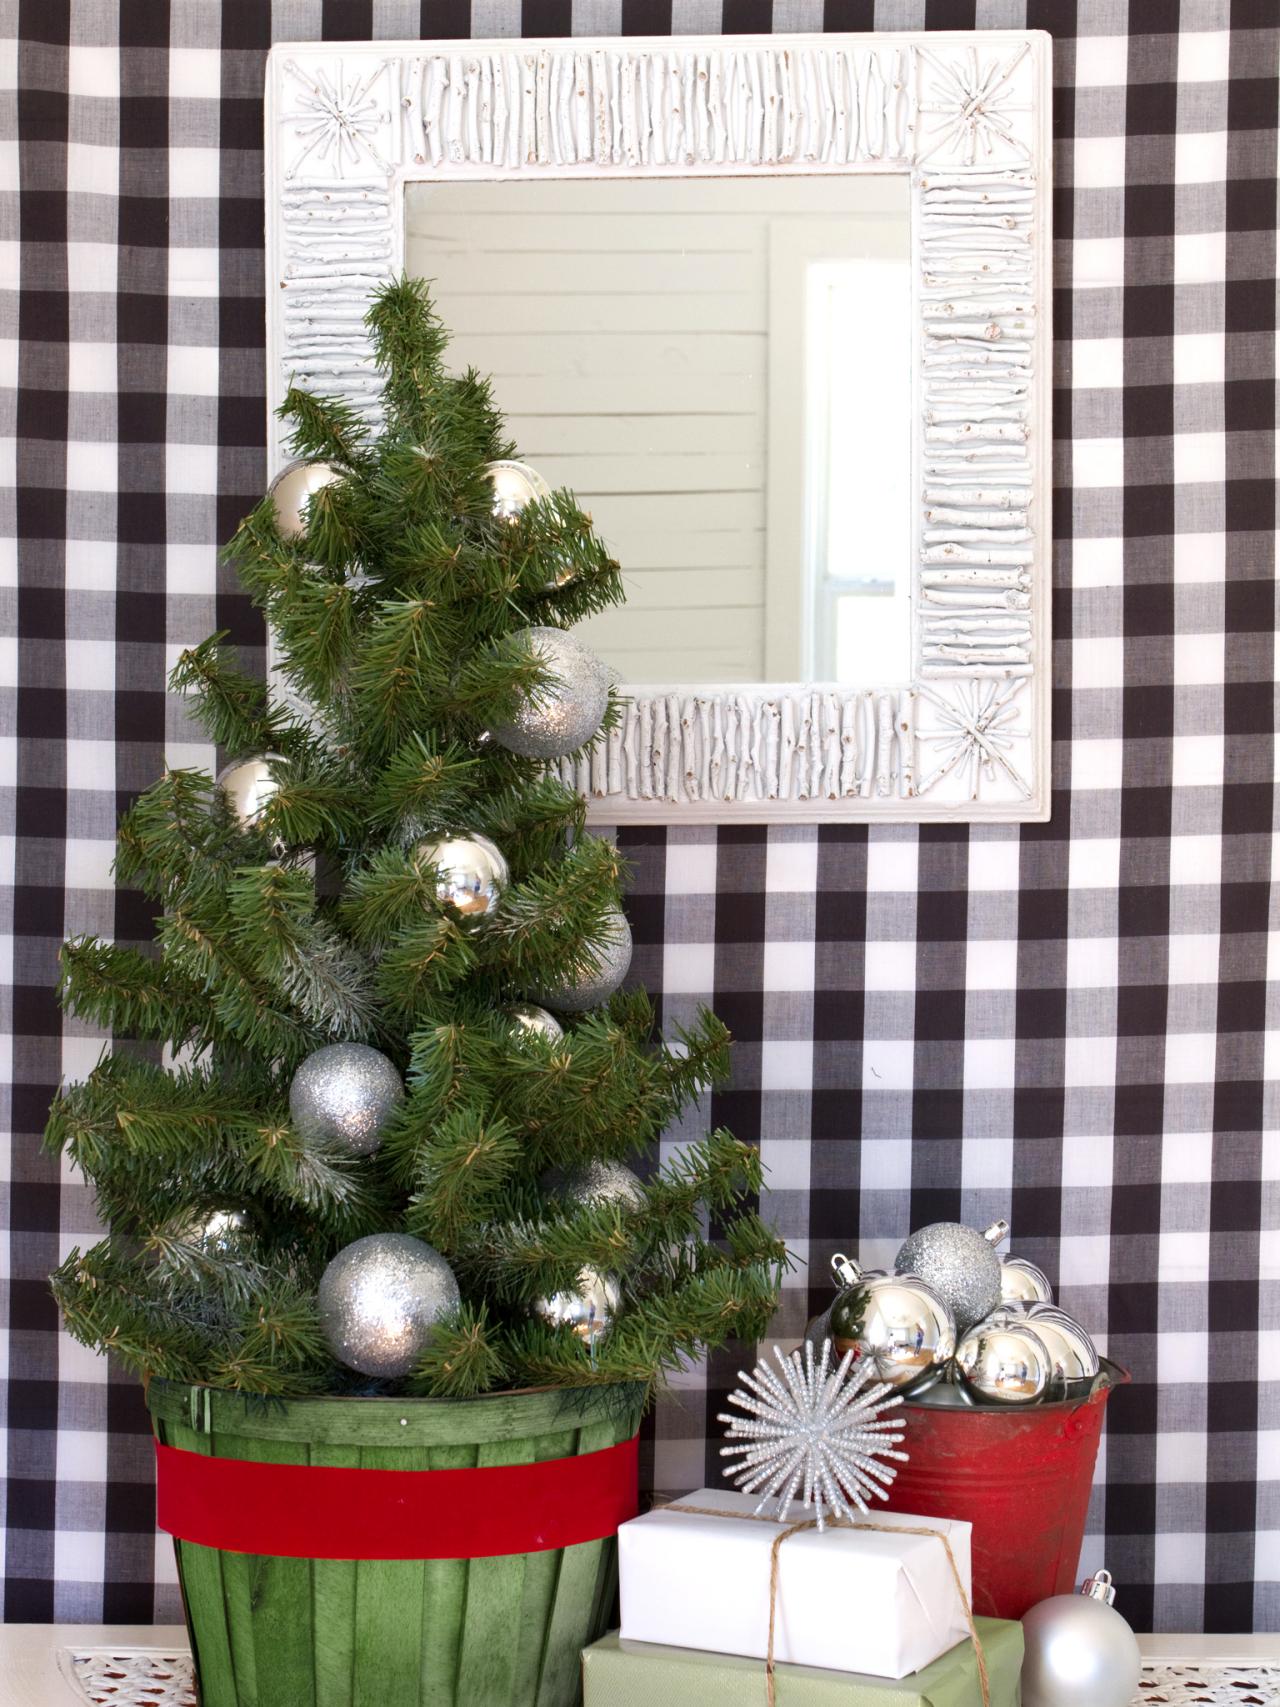 9 Ways to Add Rustic and Cozy Christmas Style - DIY Beautify - Creating  Beauty at Home